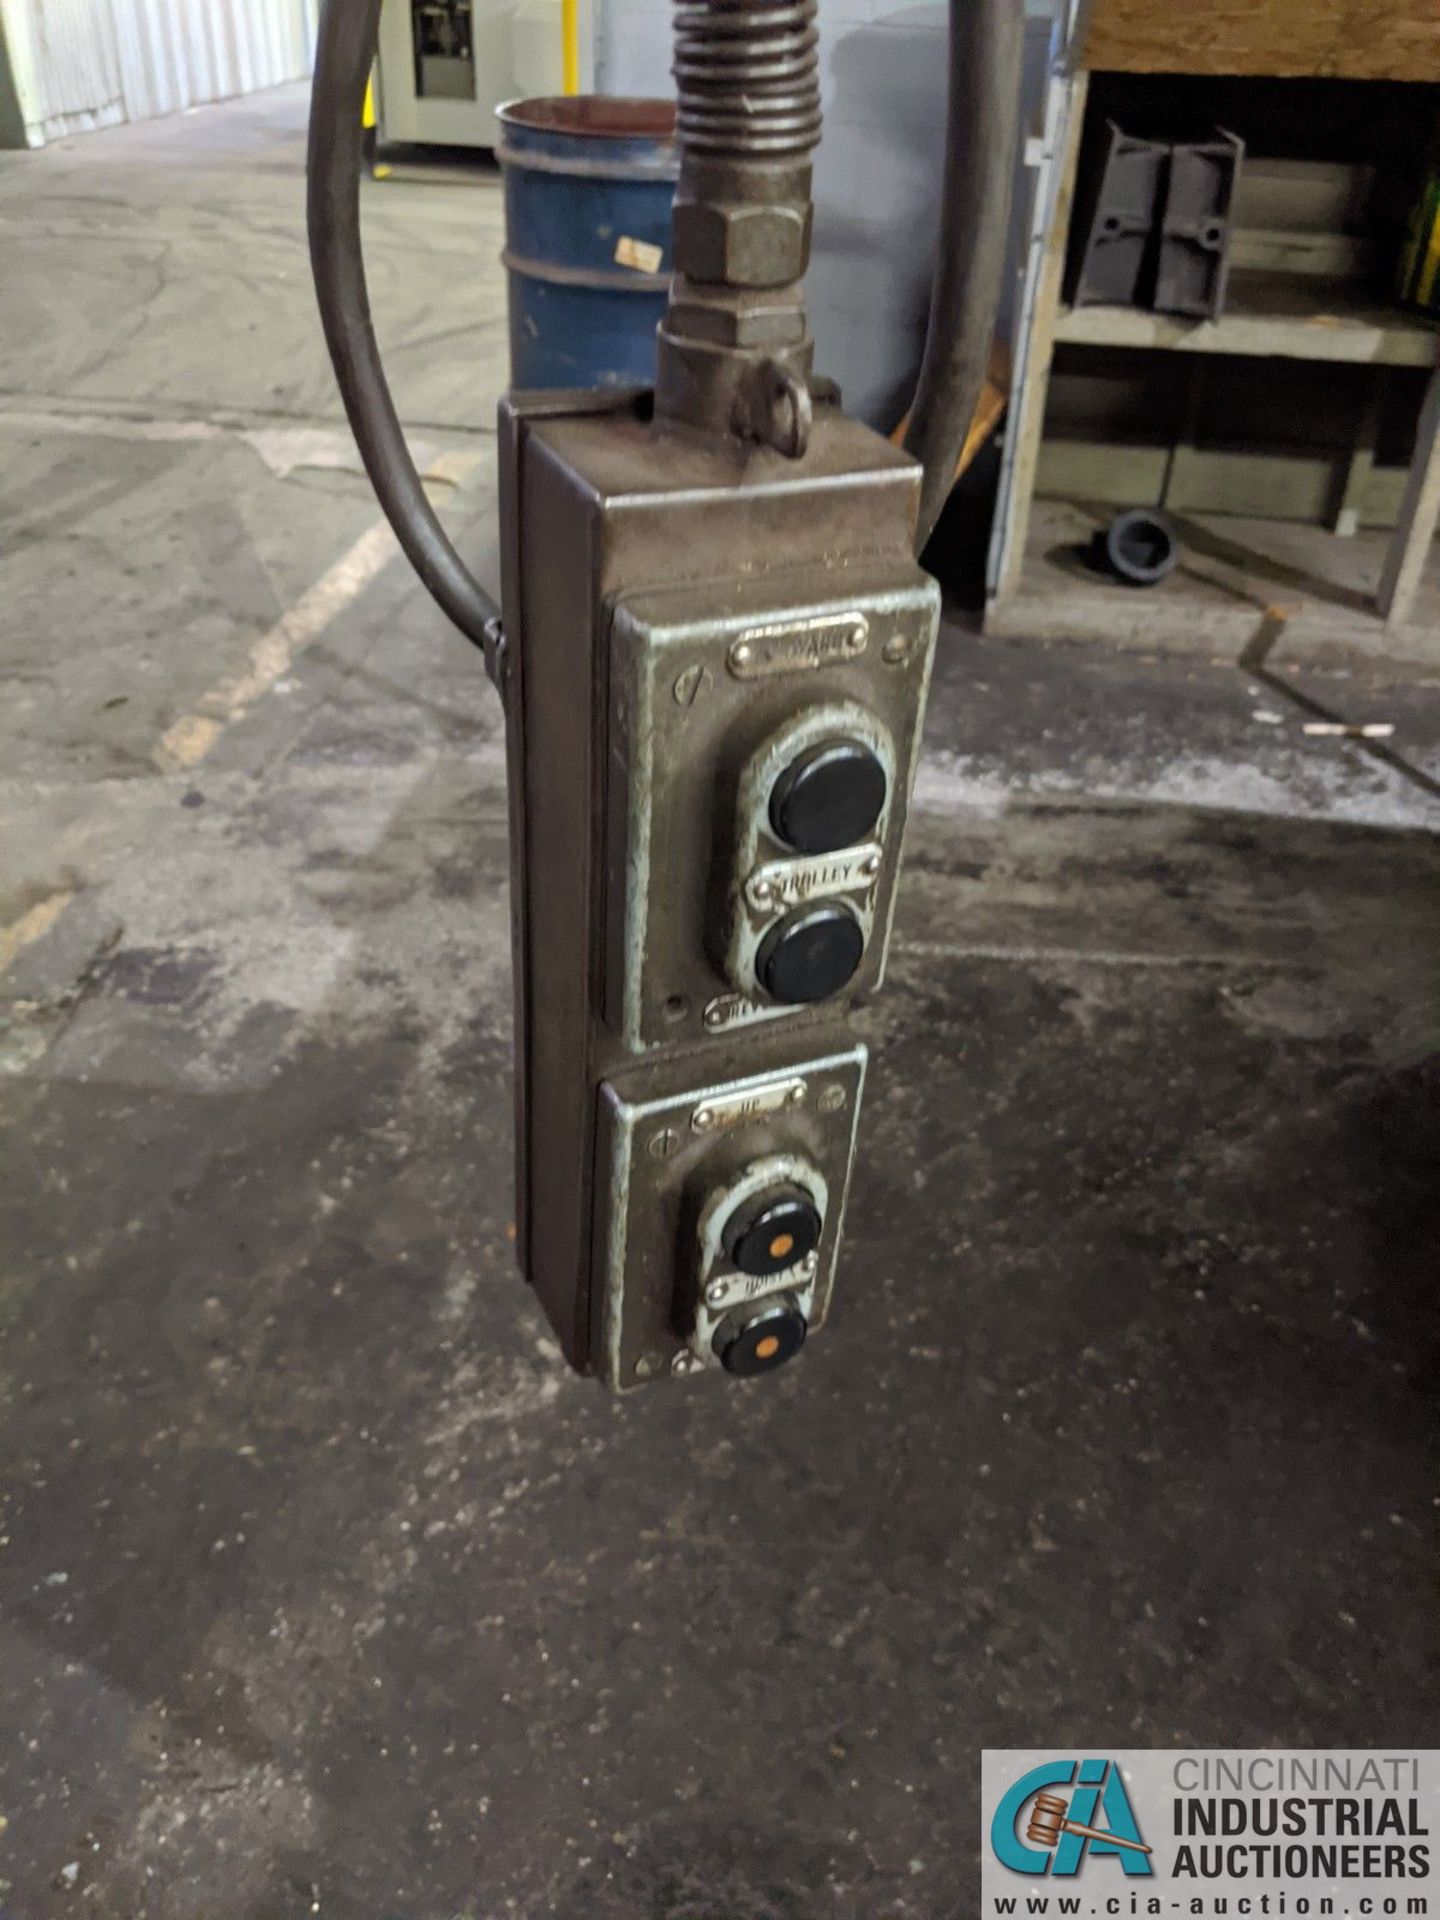 2 TON LOAD LIFTER ELECTRIC CABLE HOIST, NO I-BEAM - Image 2 of 2